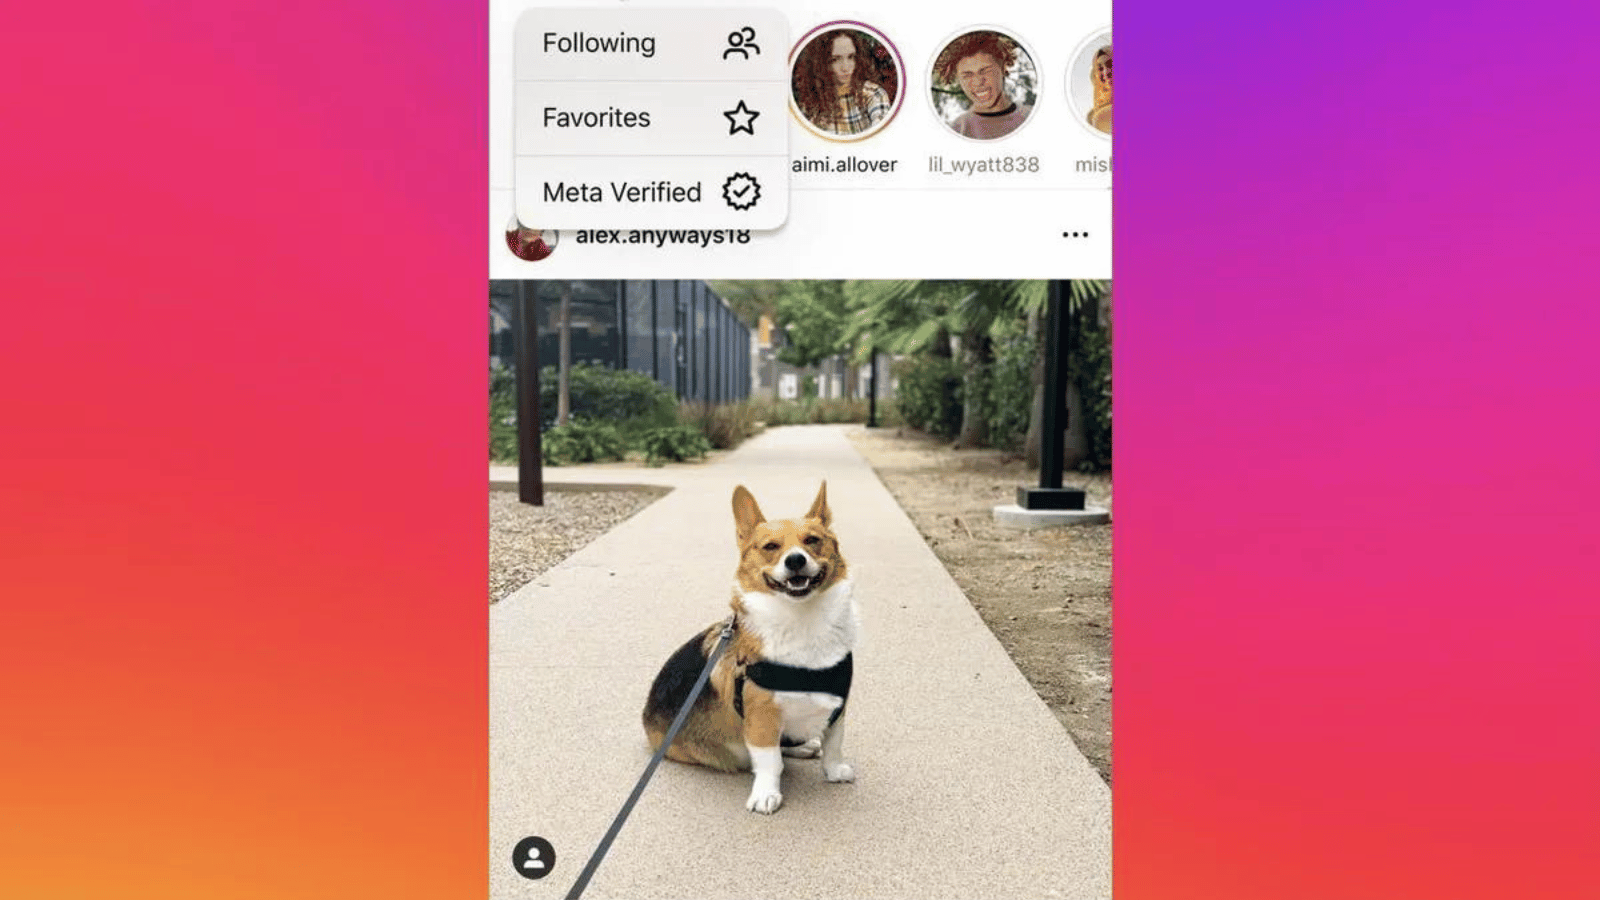 Instagram verified-only feed